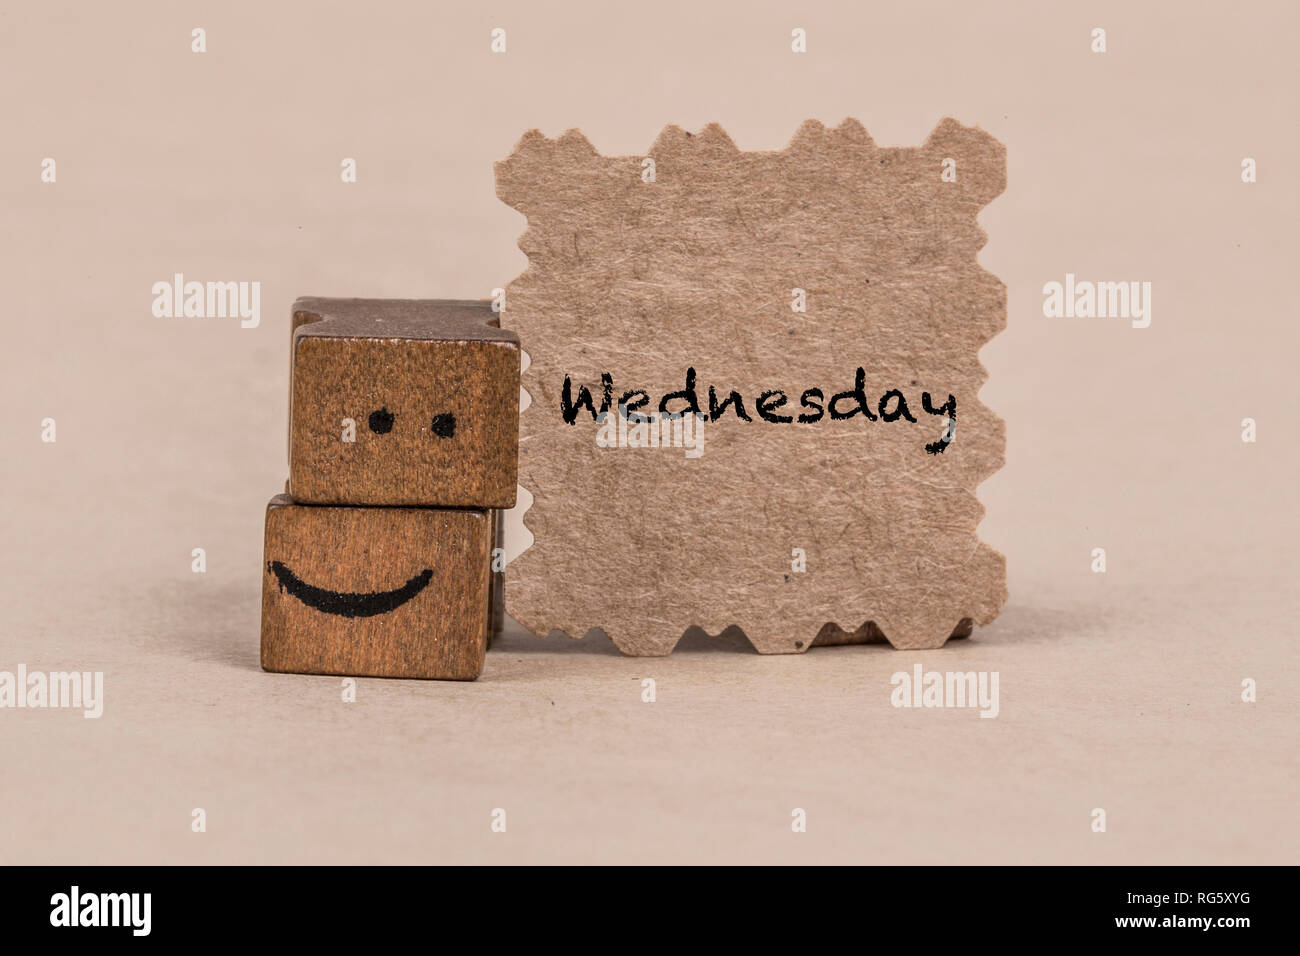 template for wednesday with smiley face icon Stock Photo